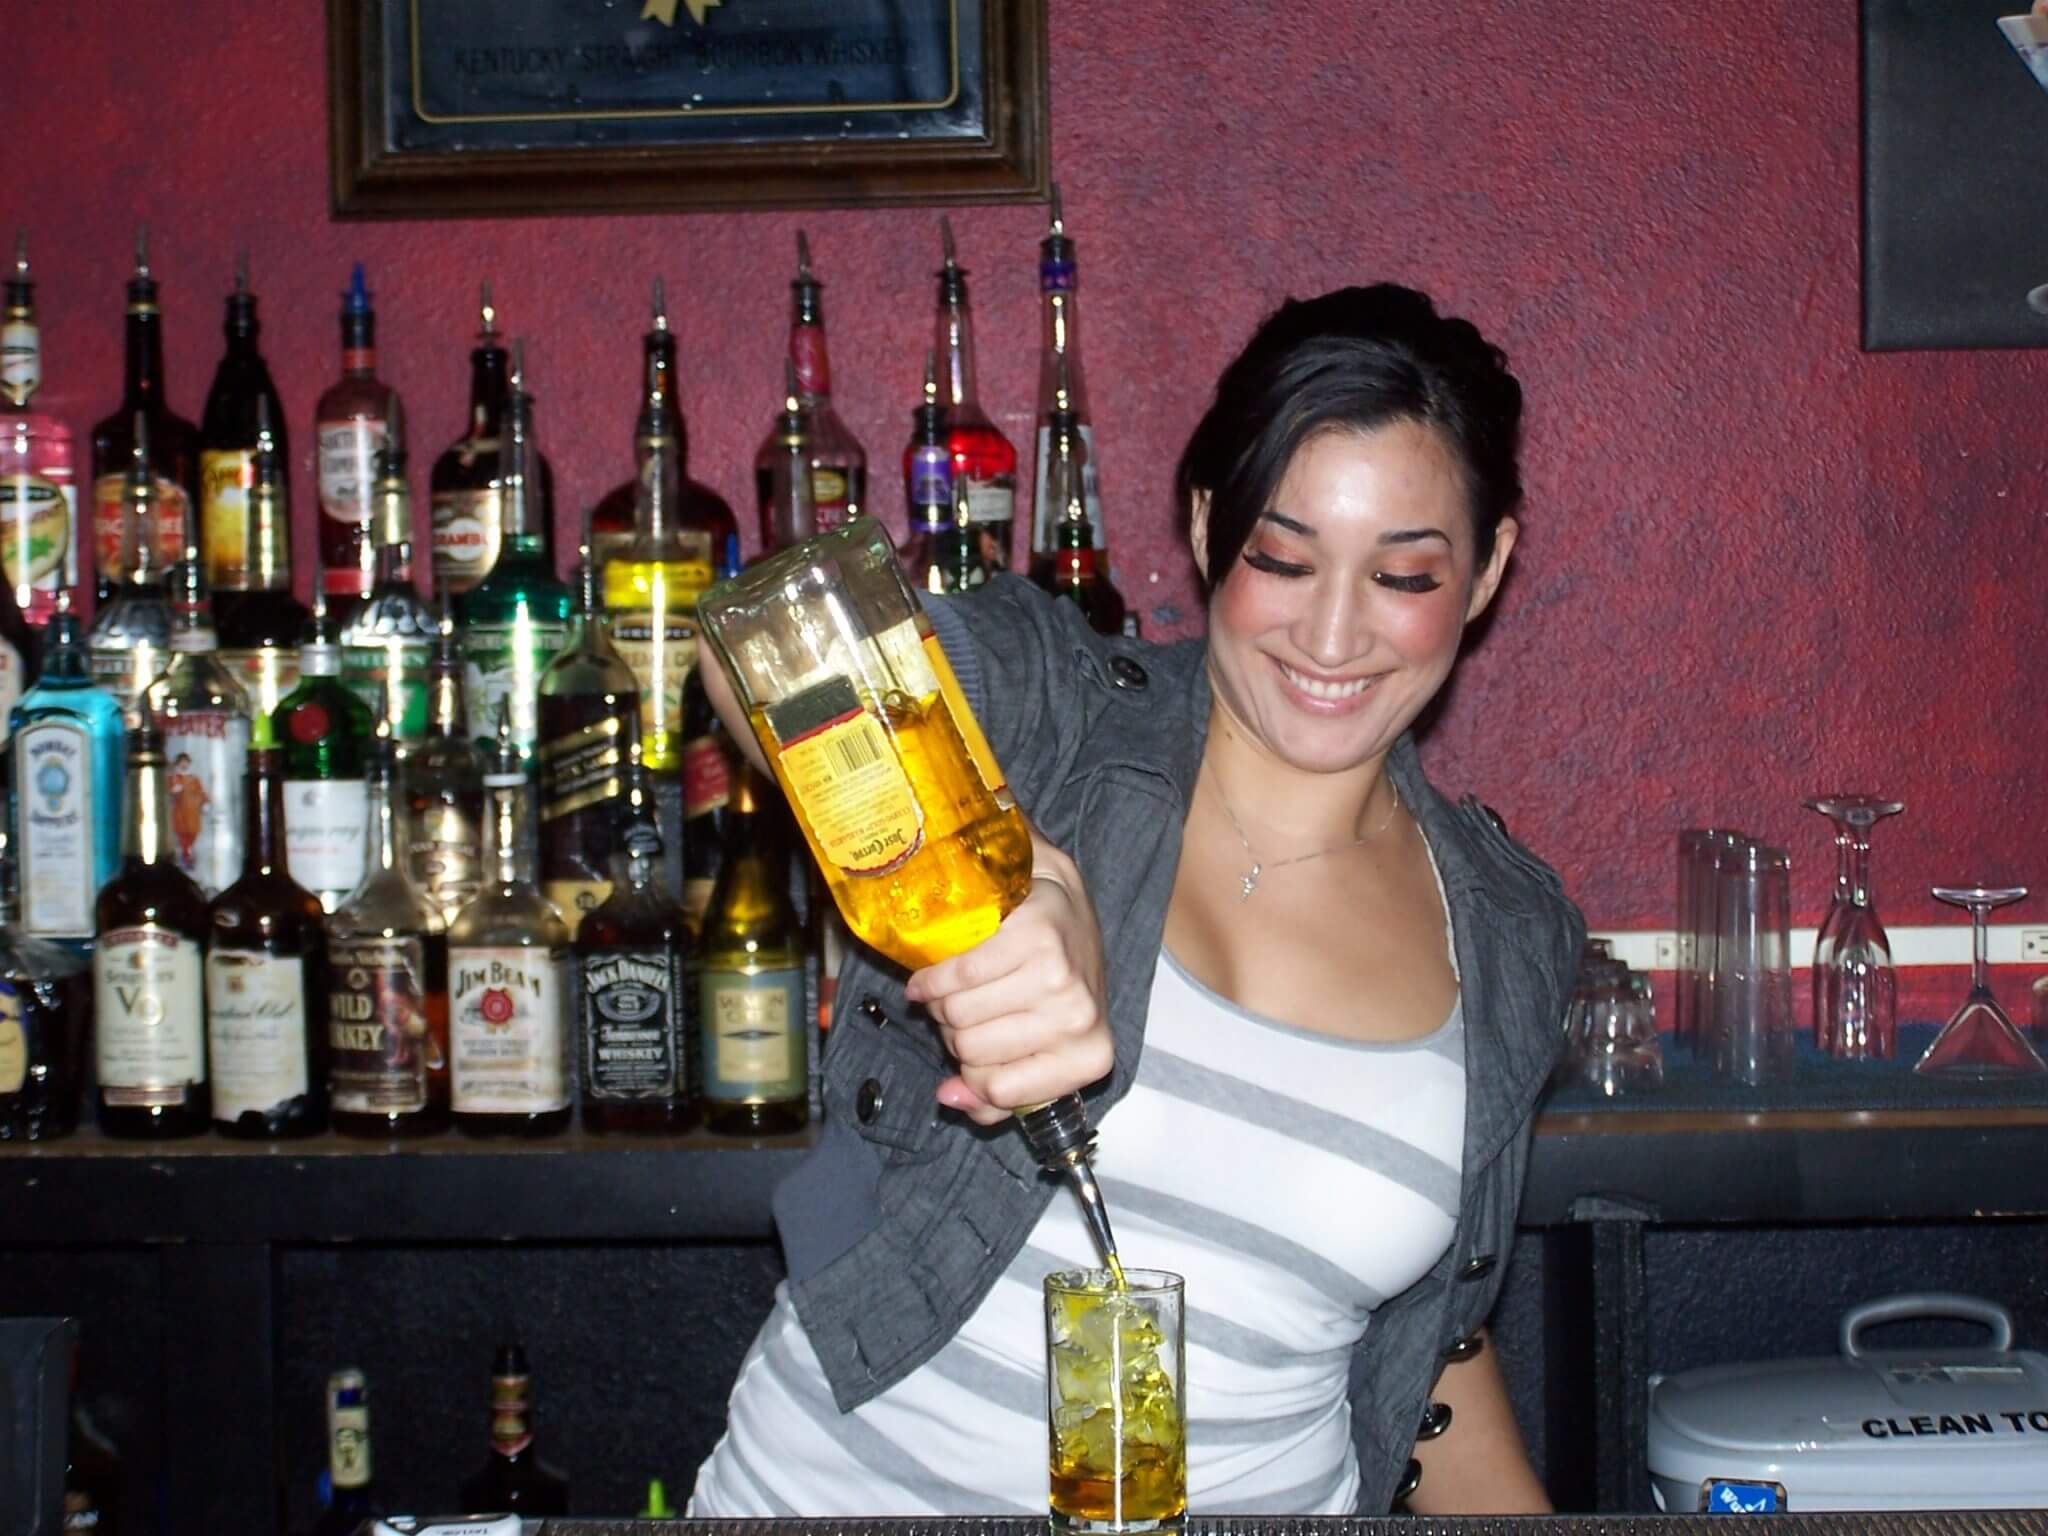 Bartending school is a great choice